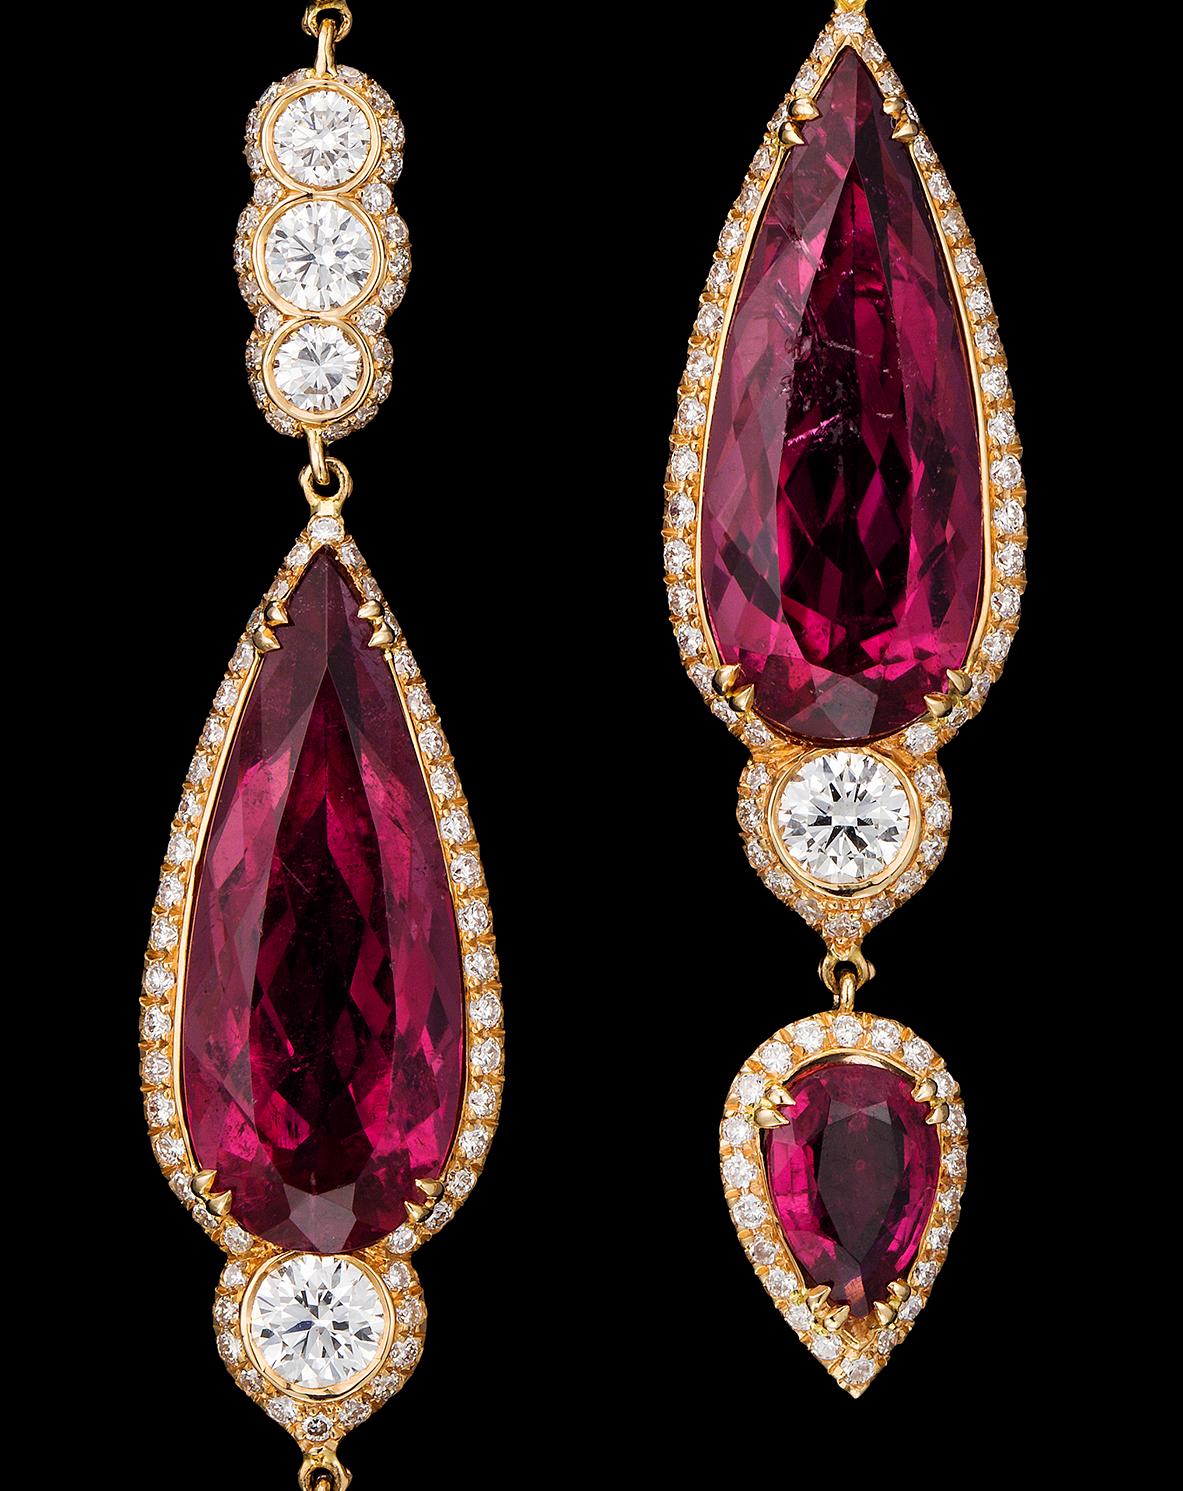 10.75 Carat Red Tourmaline Diamond Dangle Earrings in 18 Karat Rose Gold In New Condition For Sale In Ramat Gan, IL